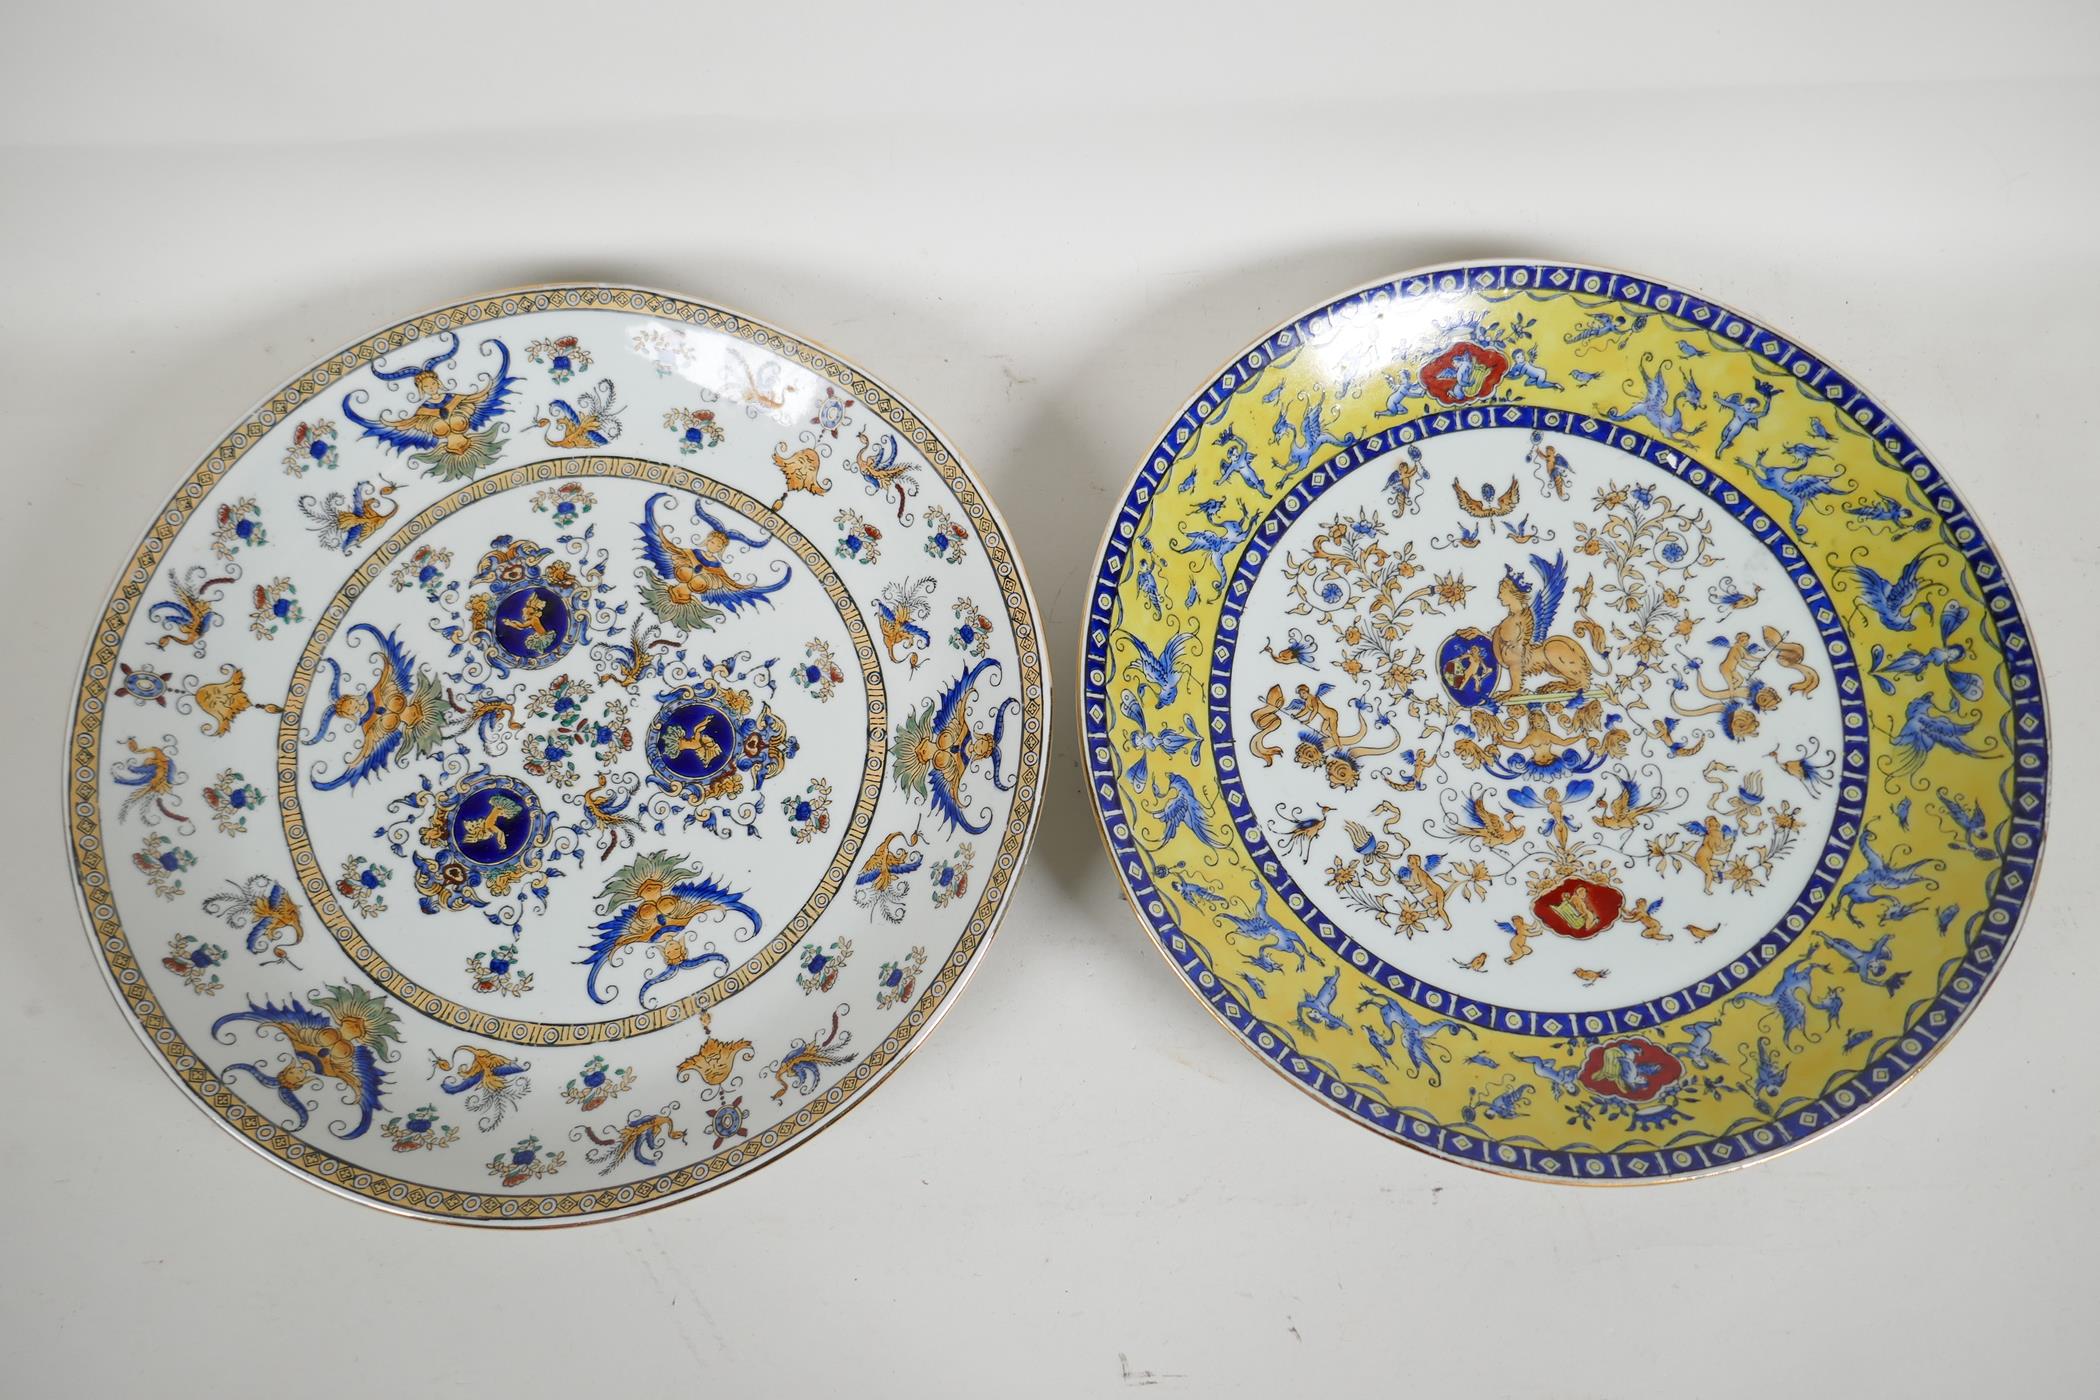 Two Chinese porcelain plates with armorial decoration, 10½" diameter